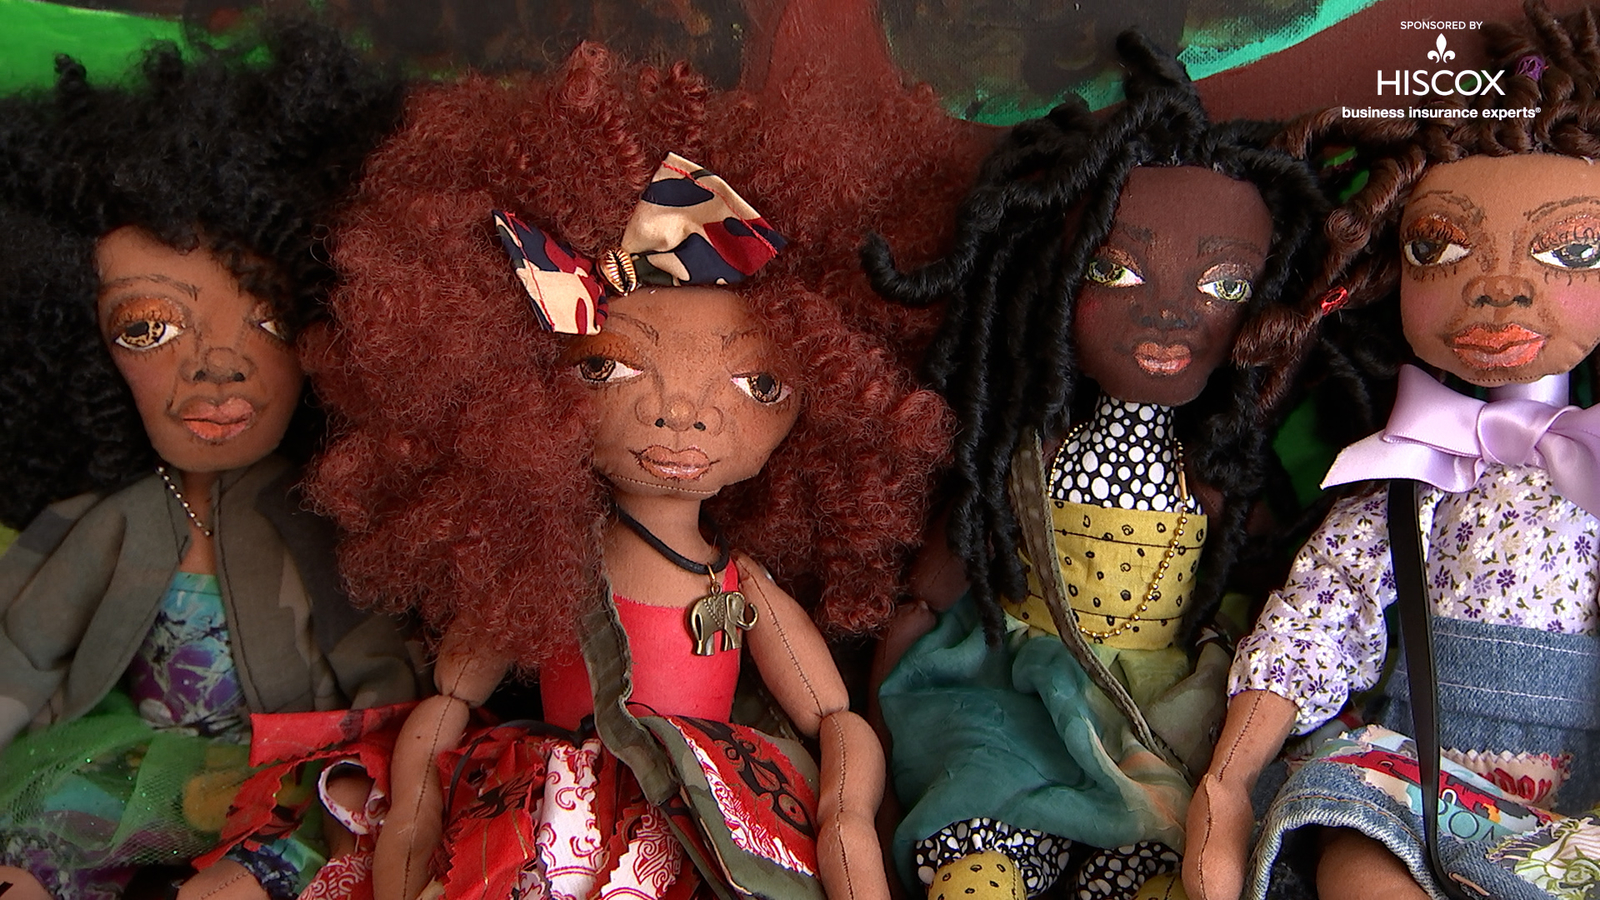 La Diva Dolls offers an array of dolls featuring figures in Black history, plus a fully customizable option. [Video]